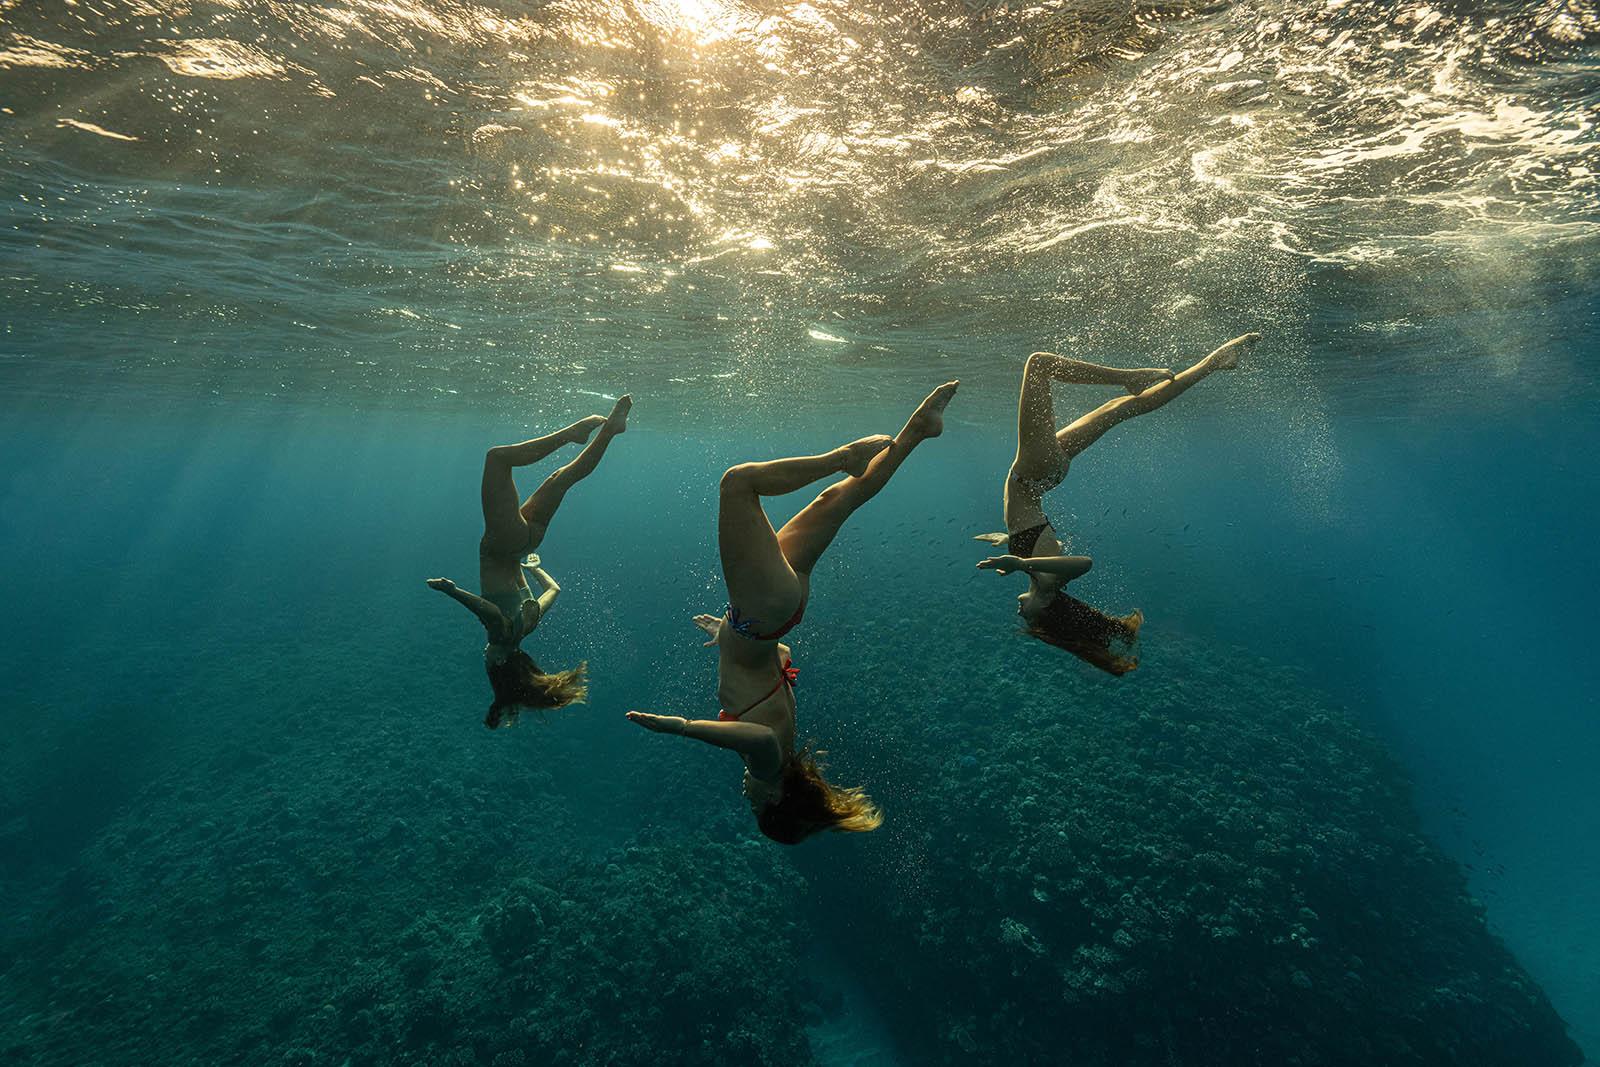 Synchronised swimming in the Blue - Signed limited edition archival pigment print, 2021   -  Edition of 5
Indian Ocean 2021

This is an Archival Pigment print on fiber based paper ( Hahnemühle Photo Rag® Baryta 315 gsm , Acid-free and lignin-free